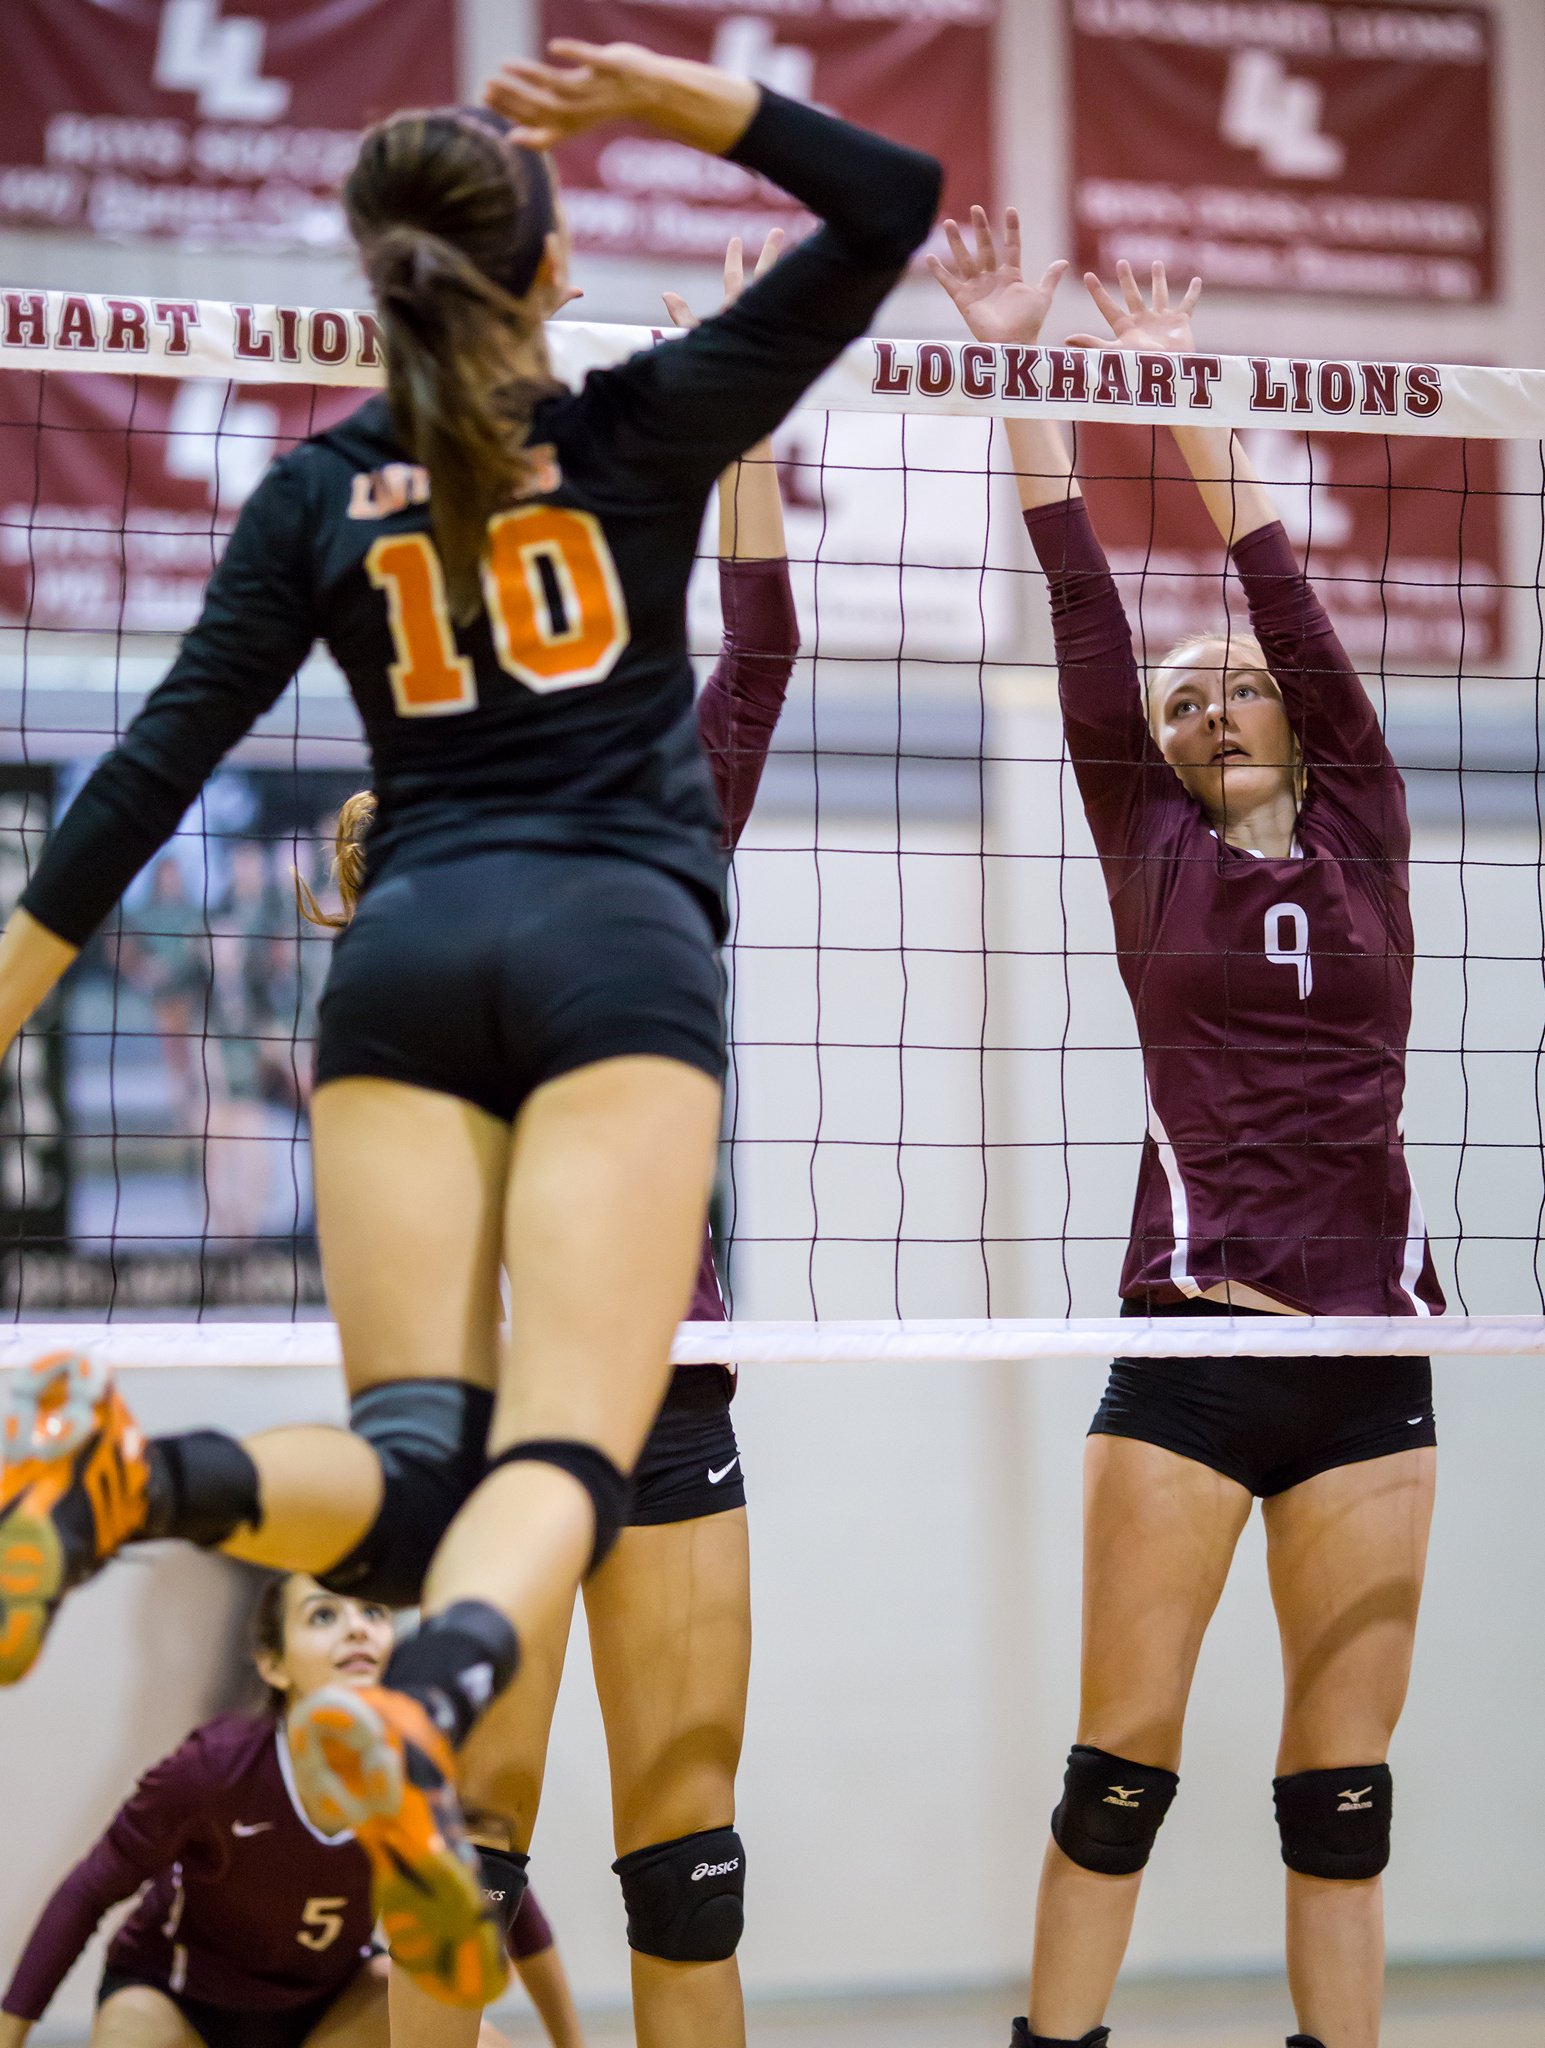 High School Volleyball Tips: Be the back row quarterback who maximizes her communication skills to help guide your team through every play. (R. Aversen)